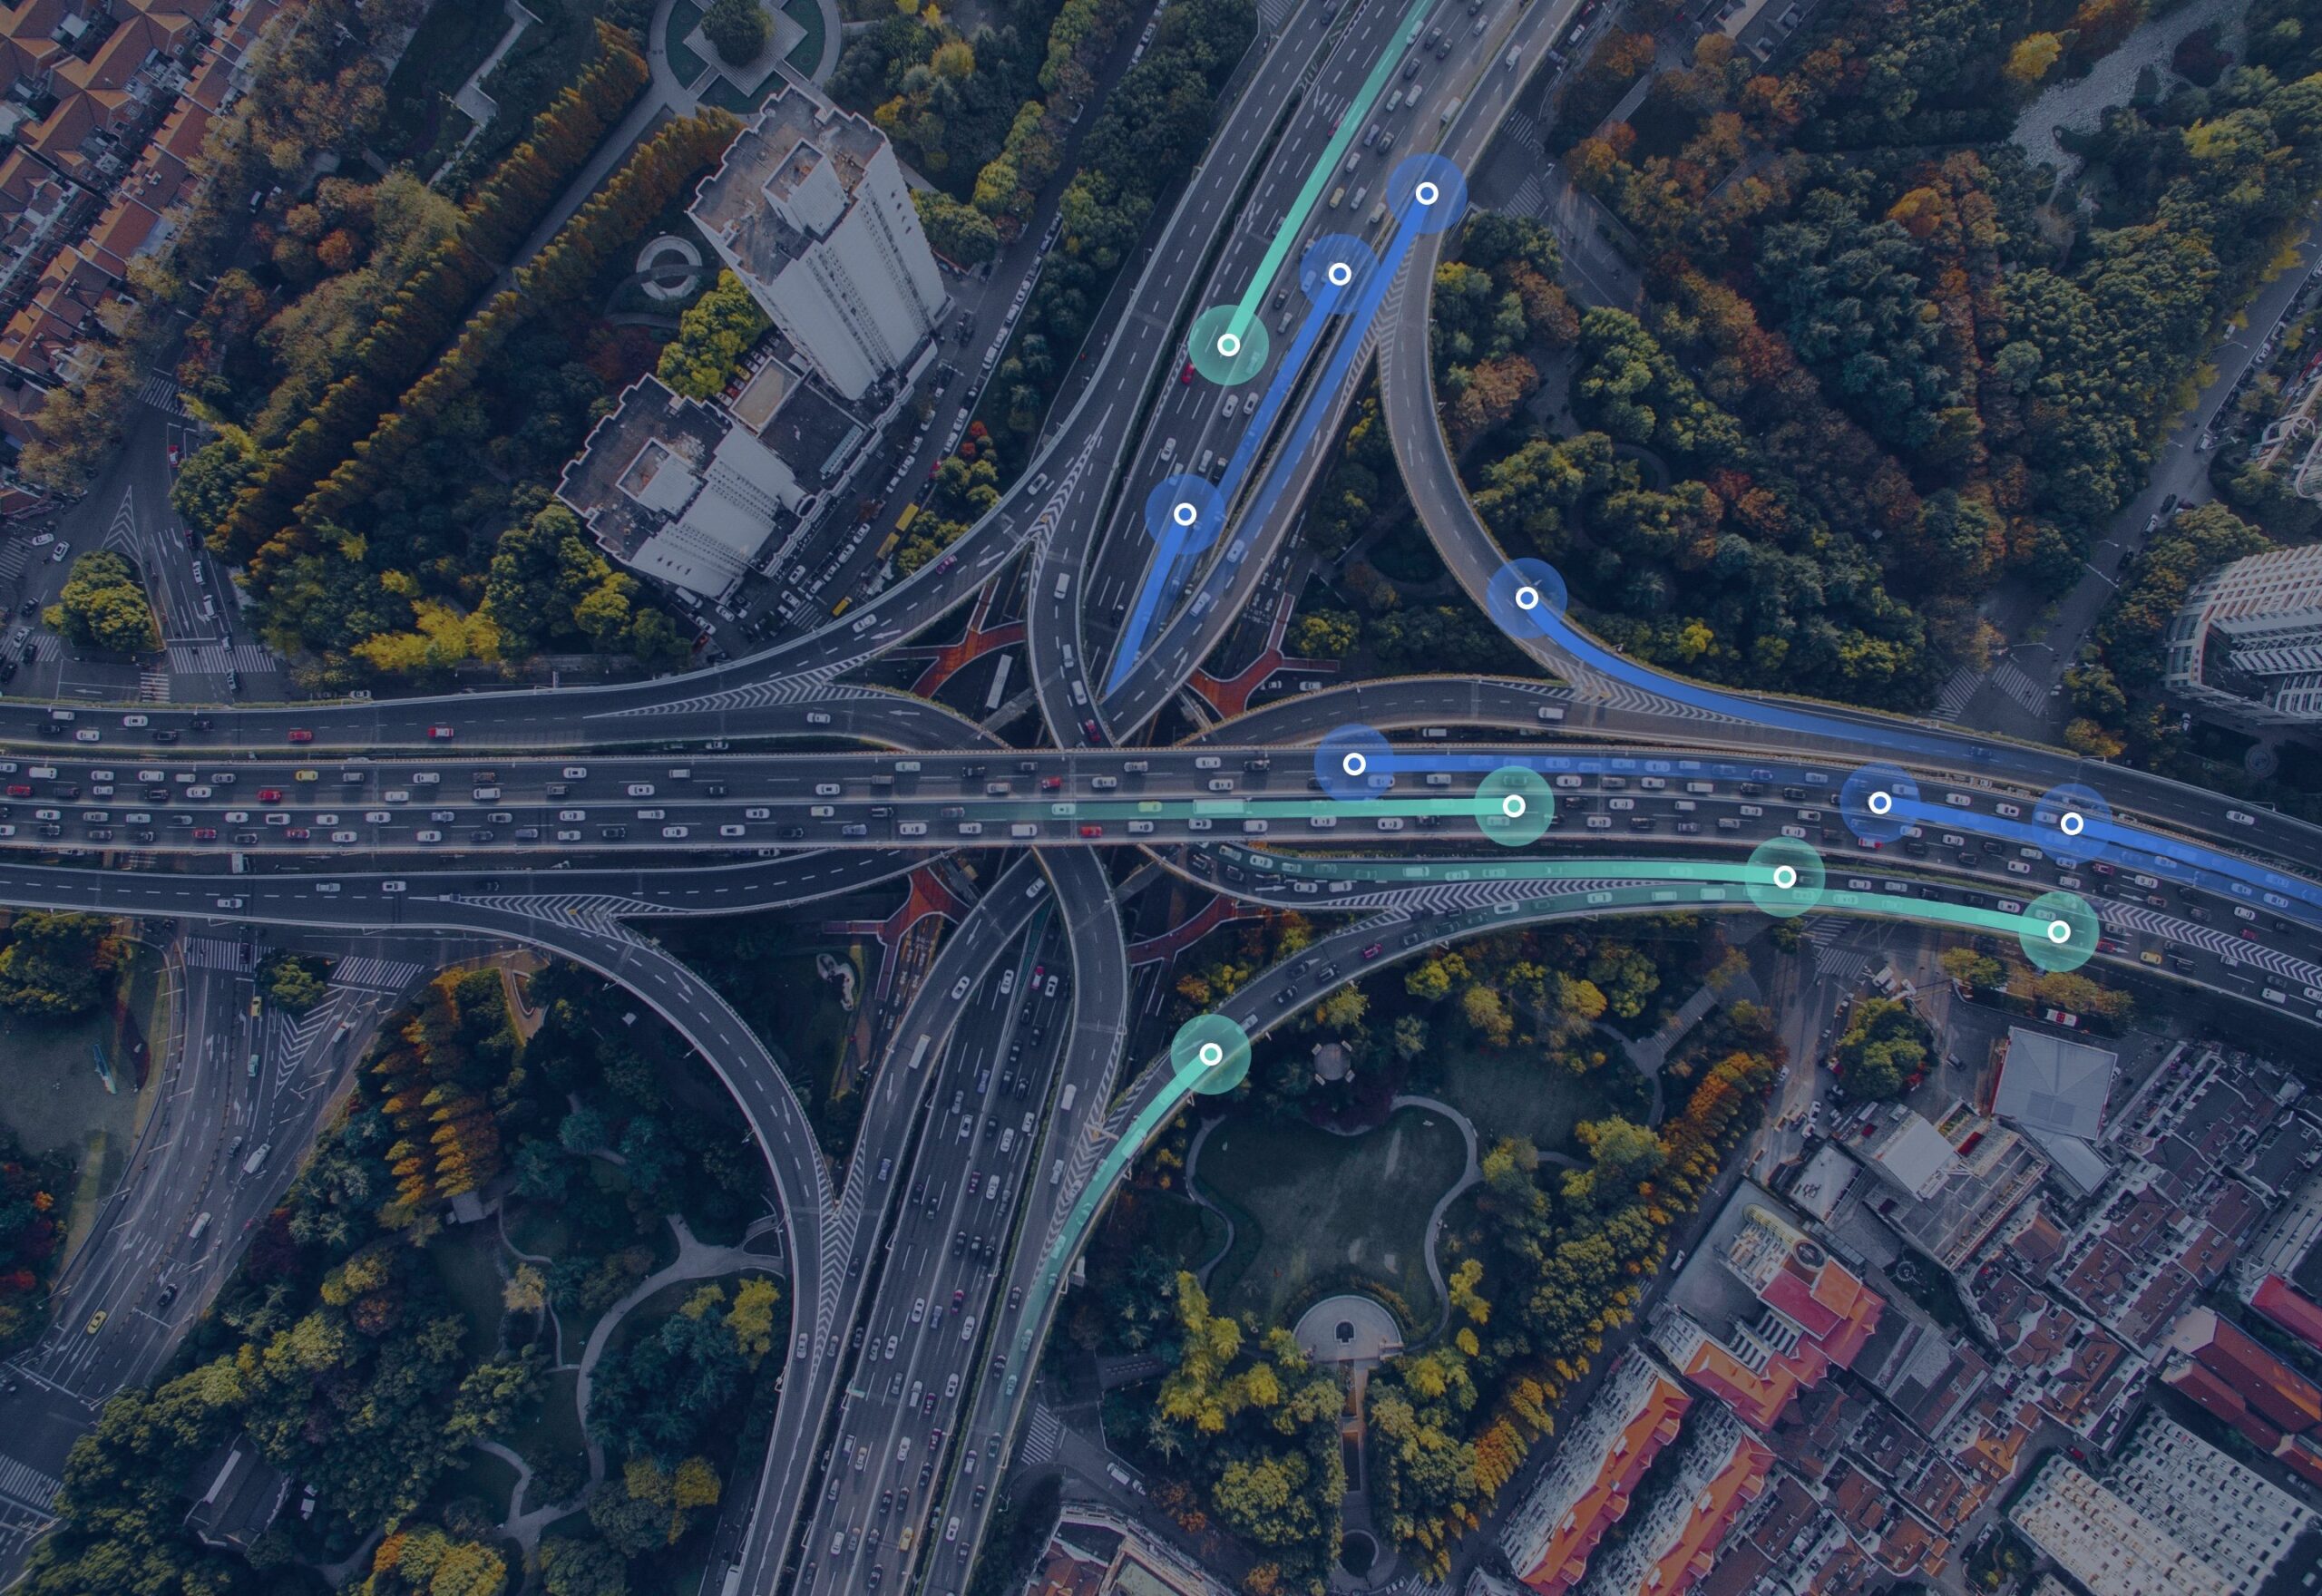 Skyview of highway intersection